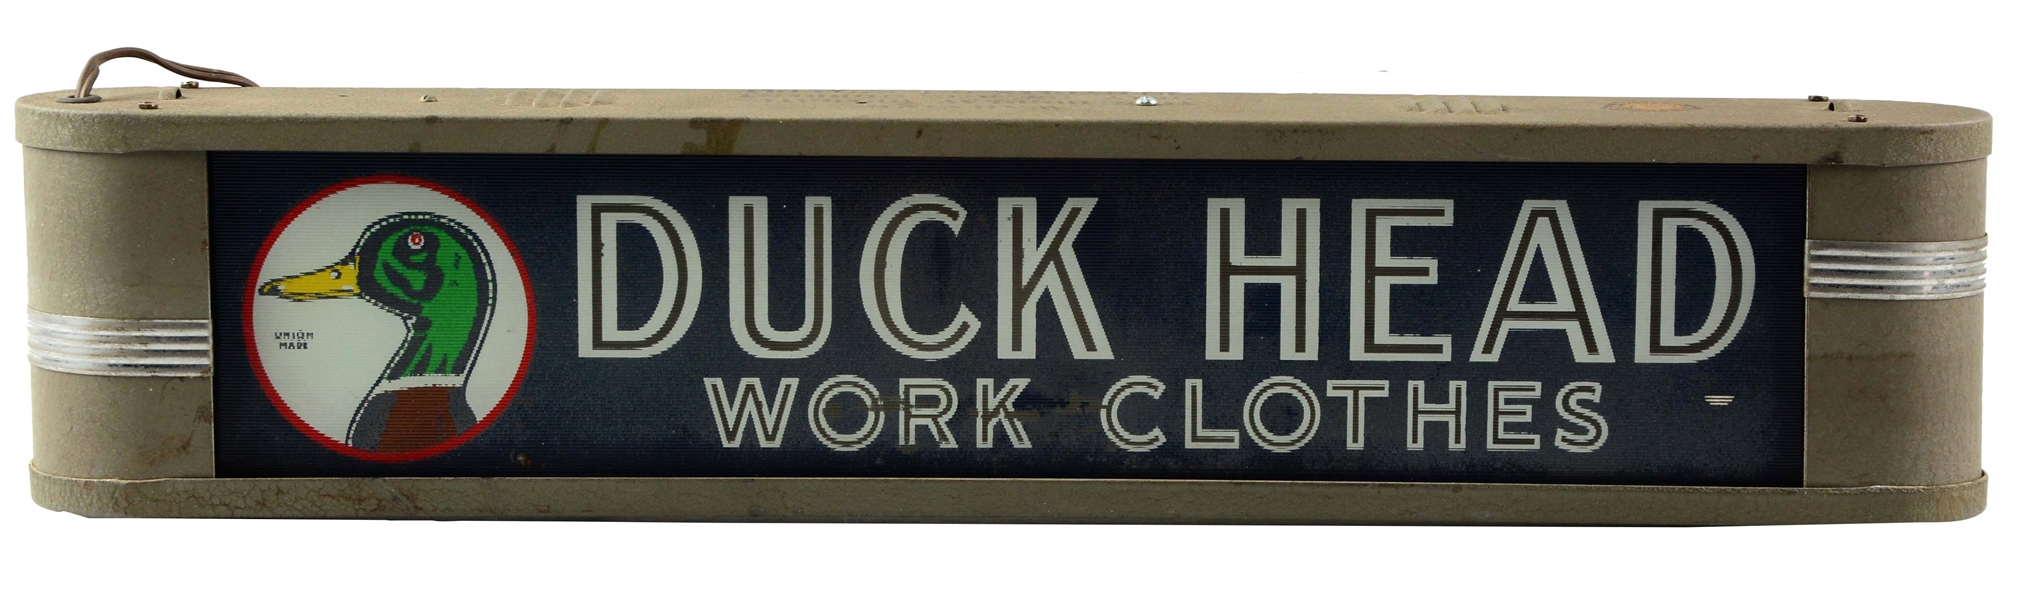 DUCK HEAD WORK CLOTHES COUNTERTOP LIGHTED SIGN.